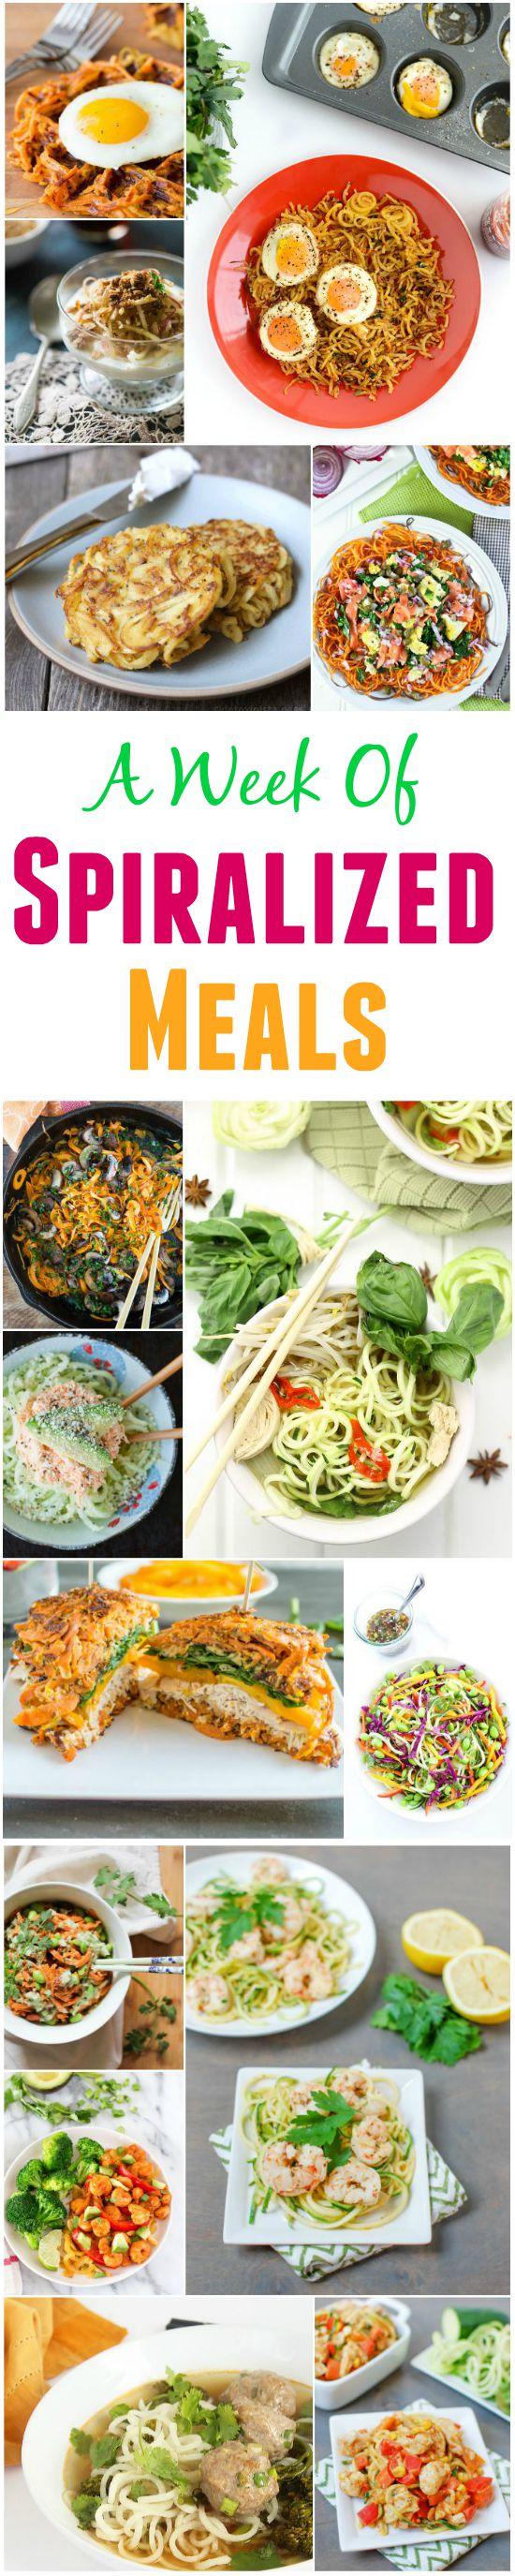 A Week of Spiralized Meals. Recipes for breakfast, lunch and dinner!